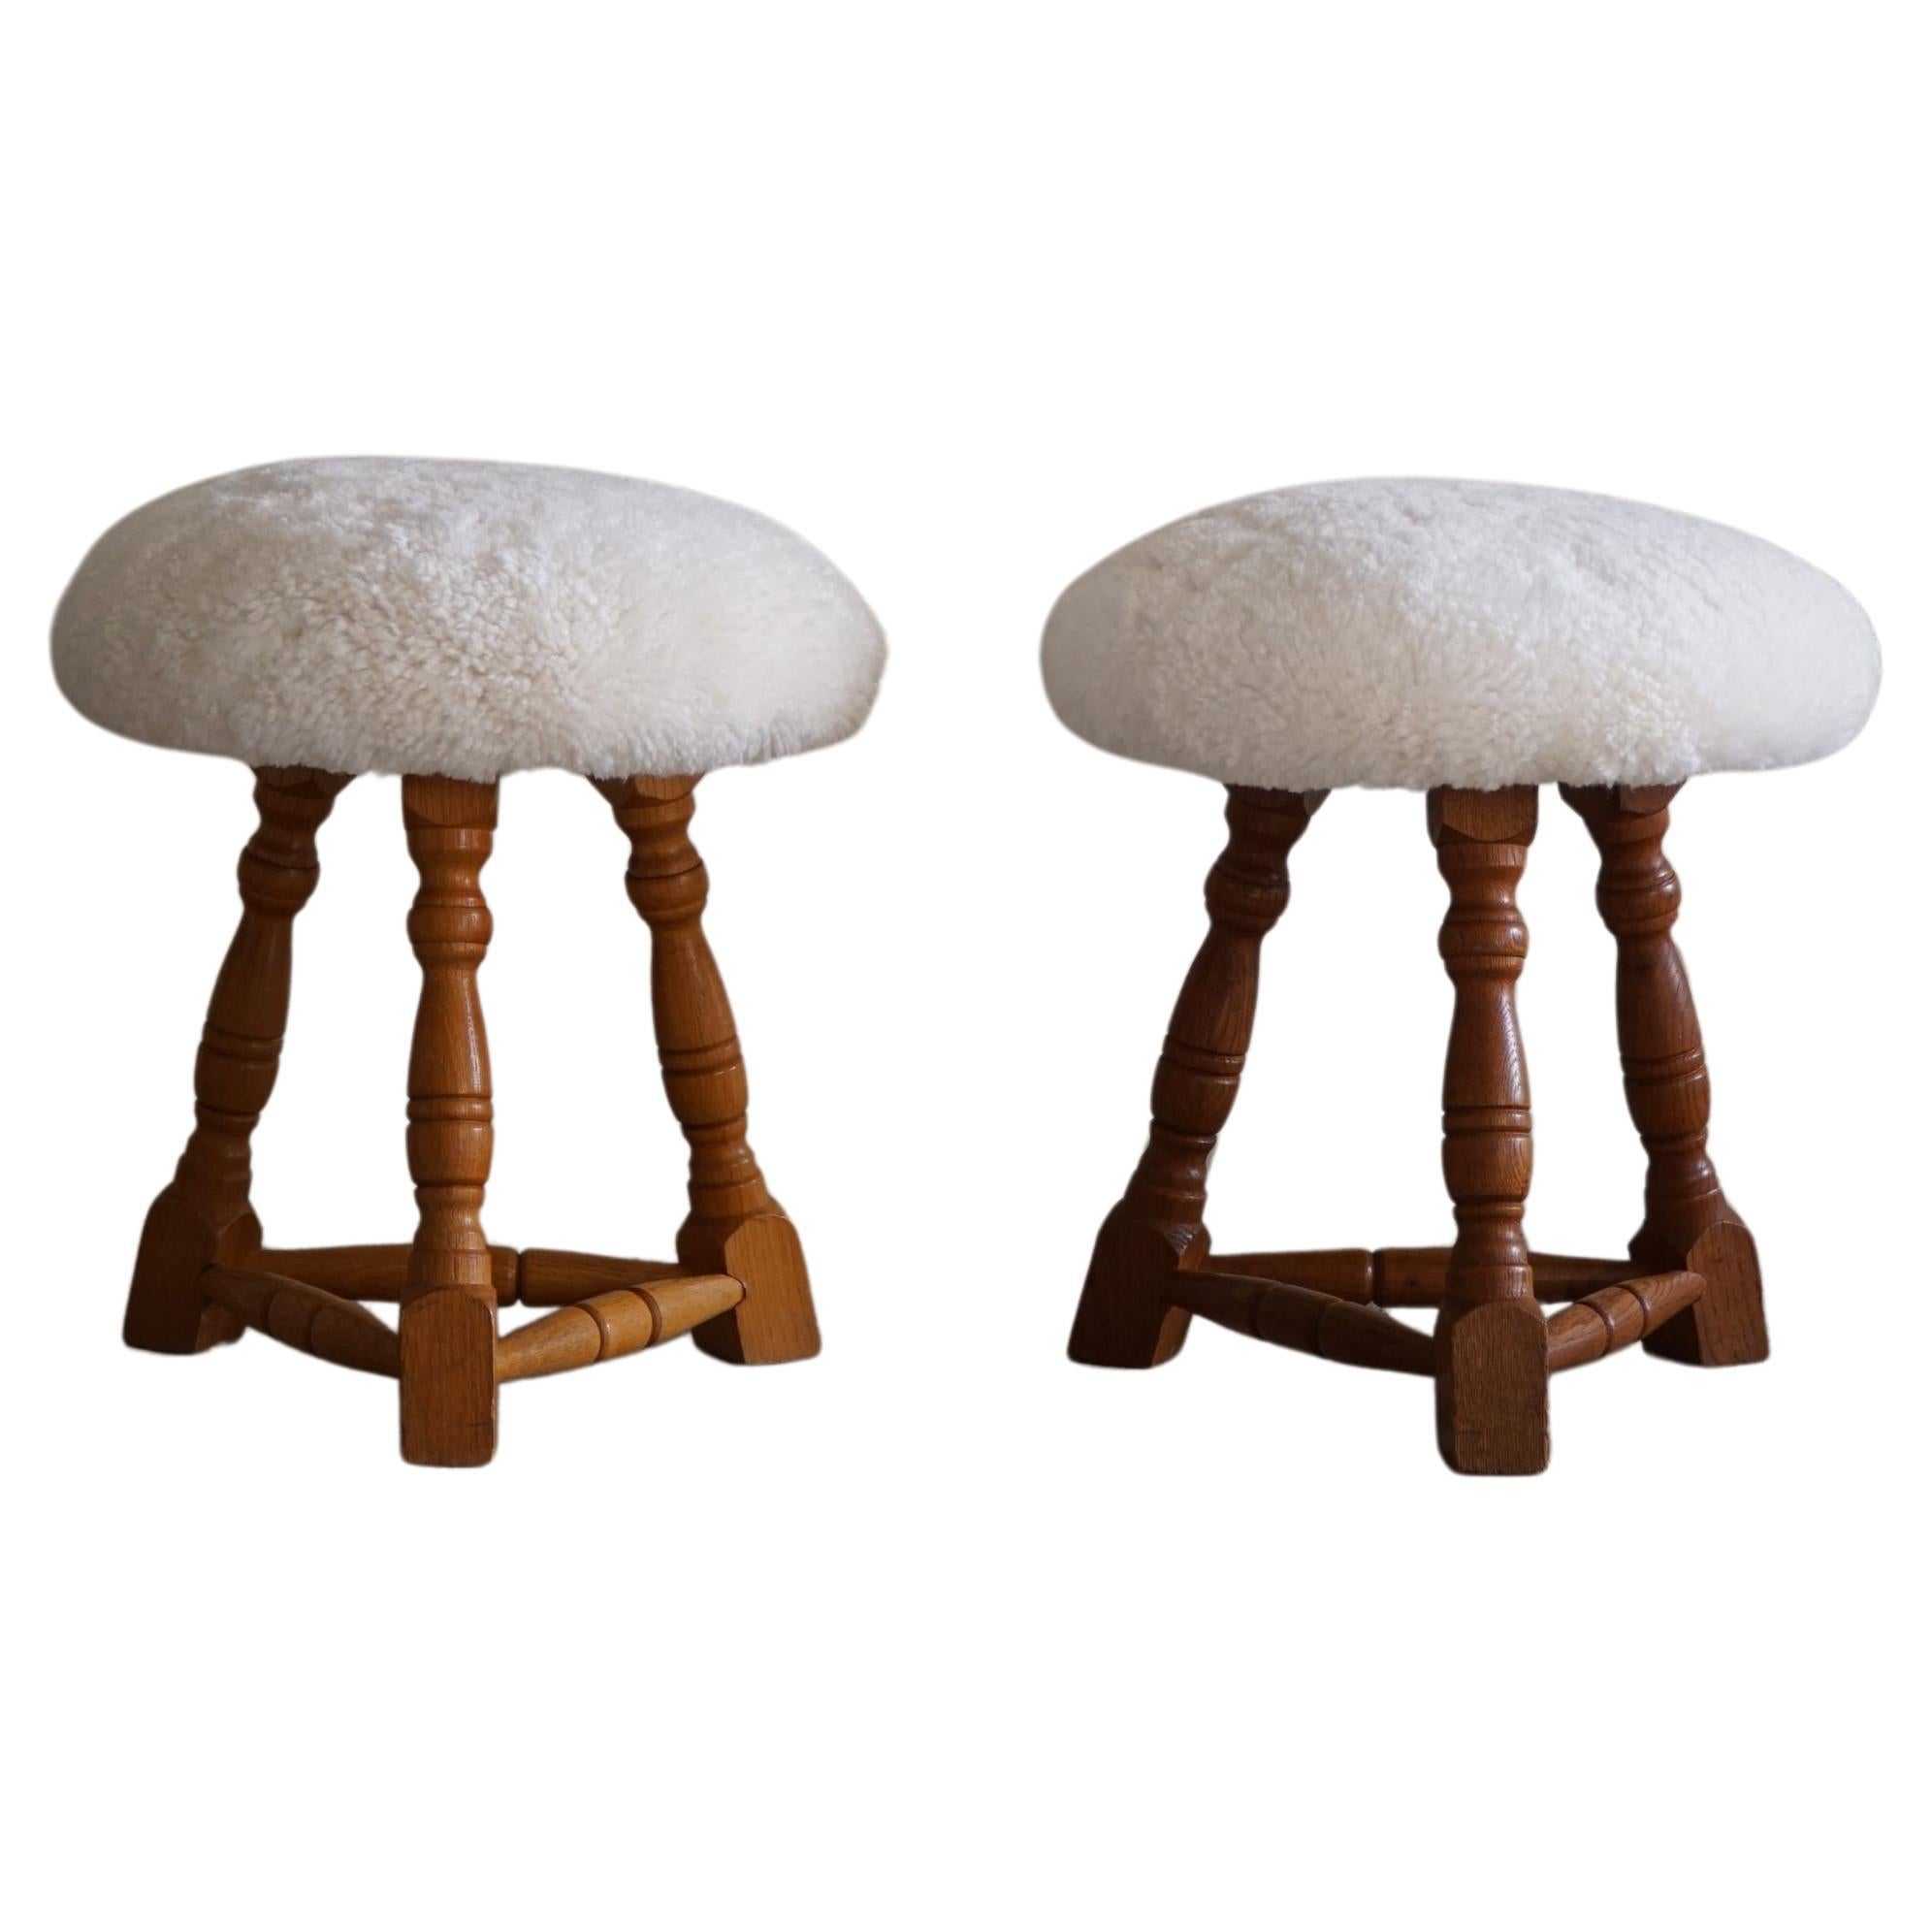 Danish Modern, A Pair of Tripod Stools, Reupholstered Seats in Lambswool, 1950s For Sale